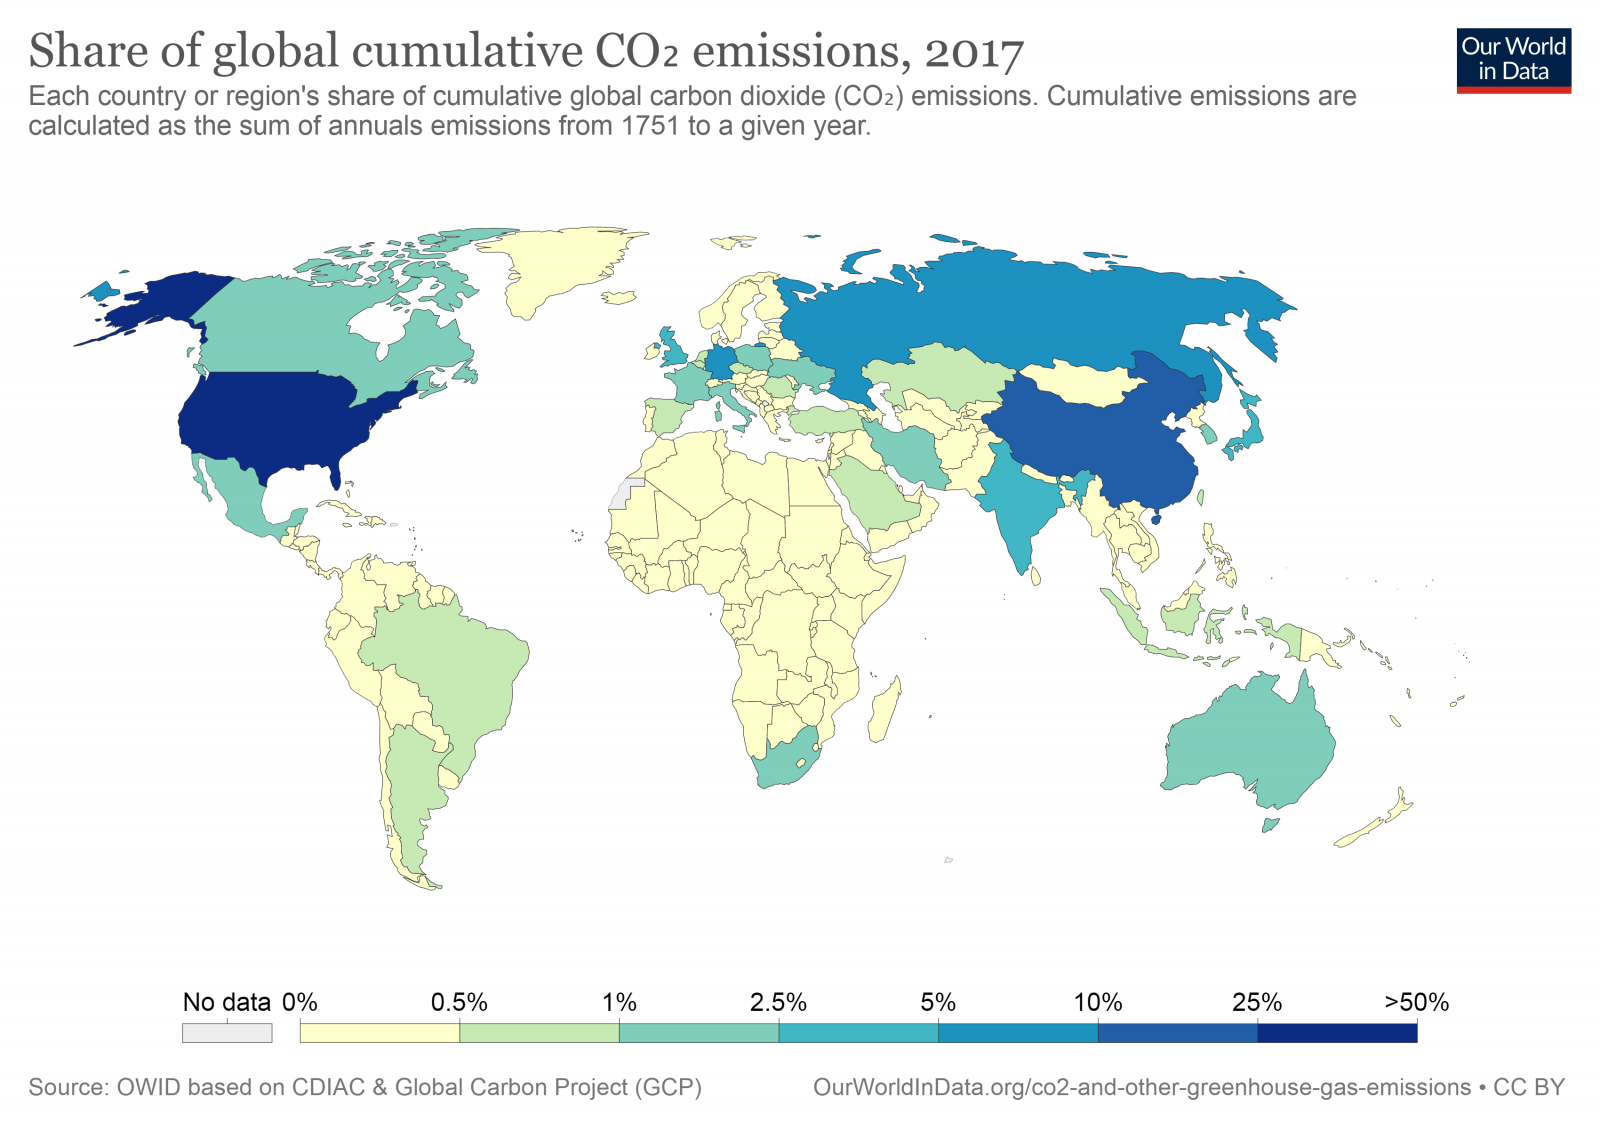 share-of-cumulative-co2.thumb.png.585b631bded120e0679fd55990a11422.png